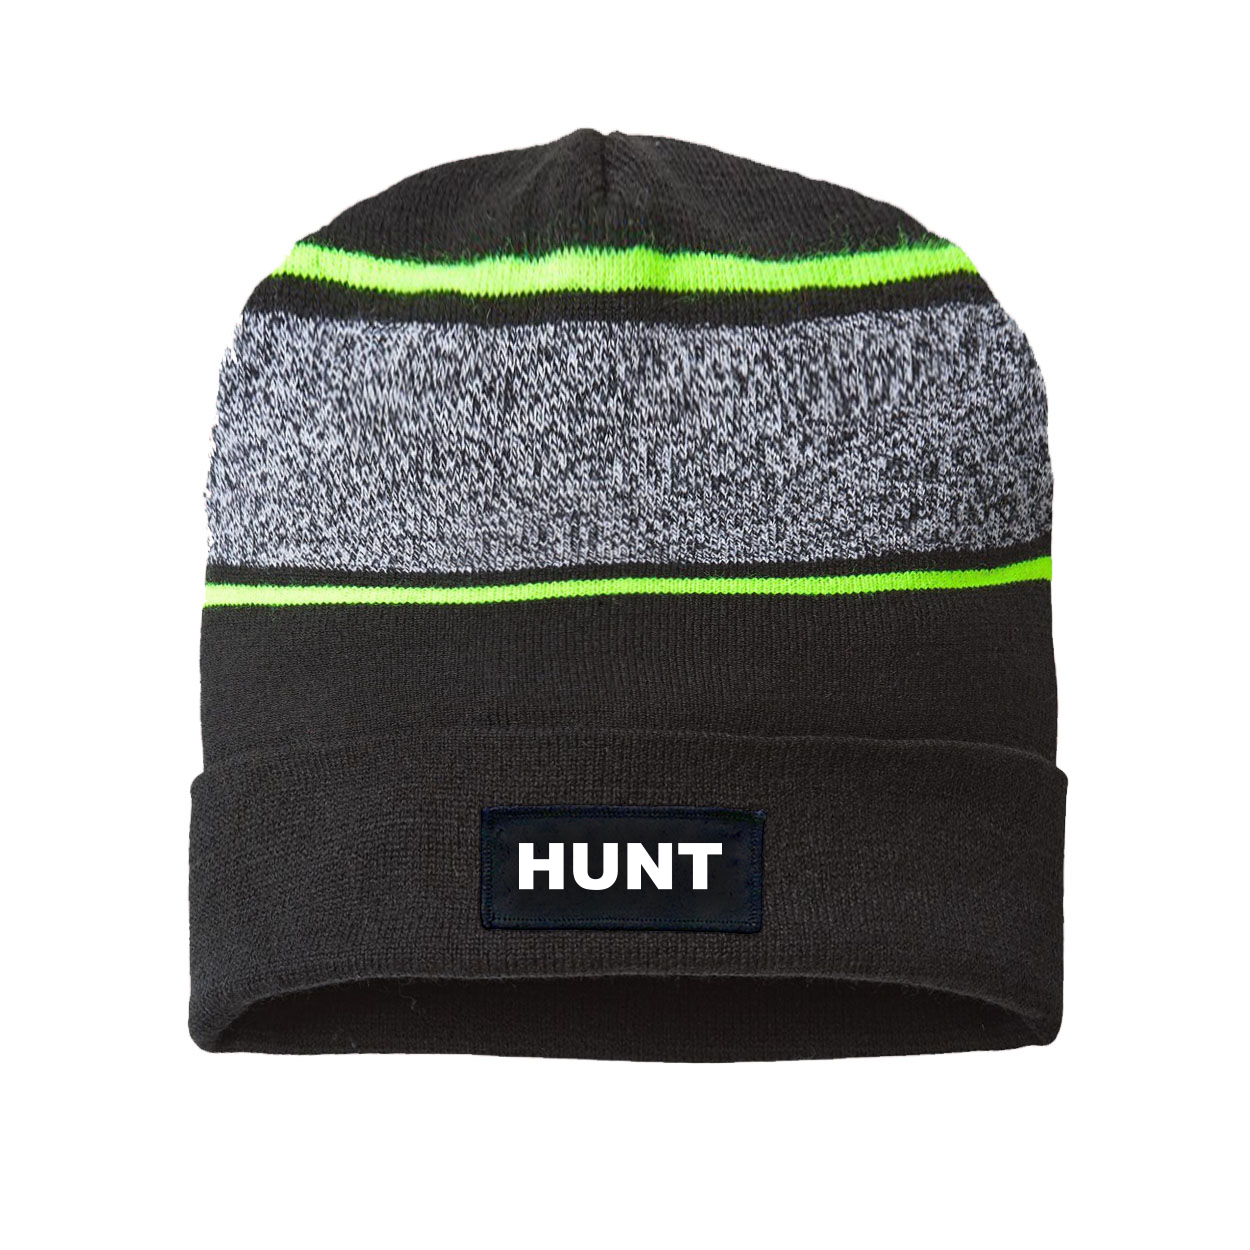 Hunt Brand Logo Night Out Woven Patch Roll Up Skully Neon Striped Beanie Black/Neon Yellow